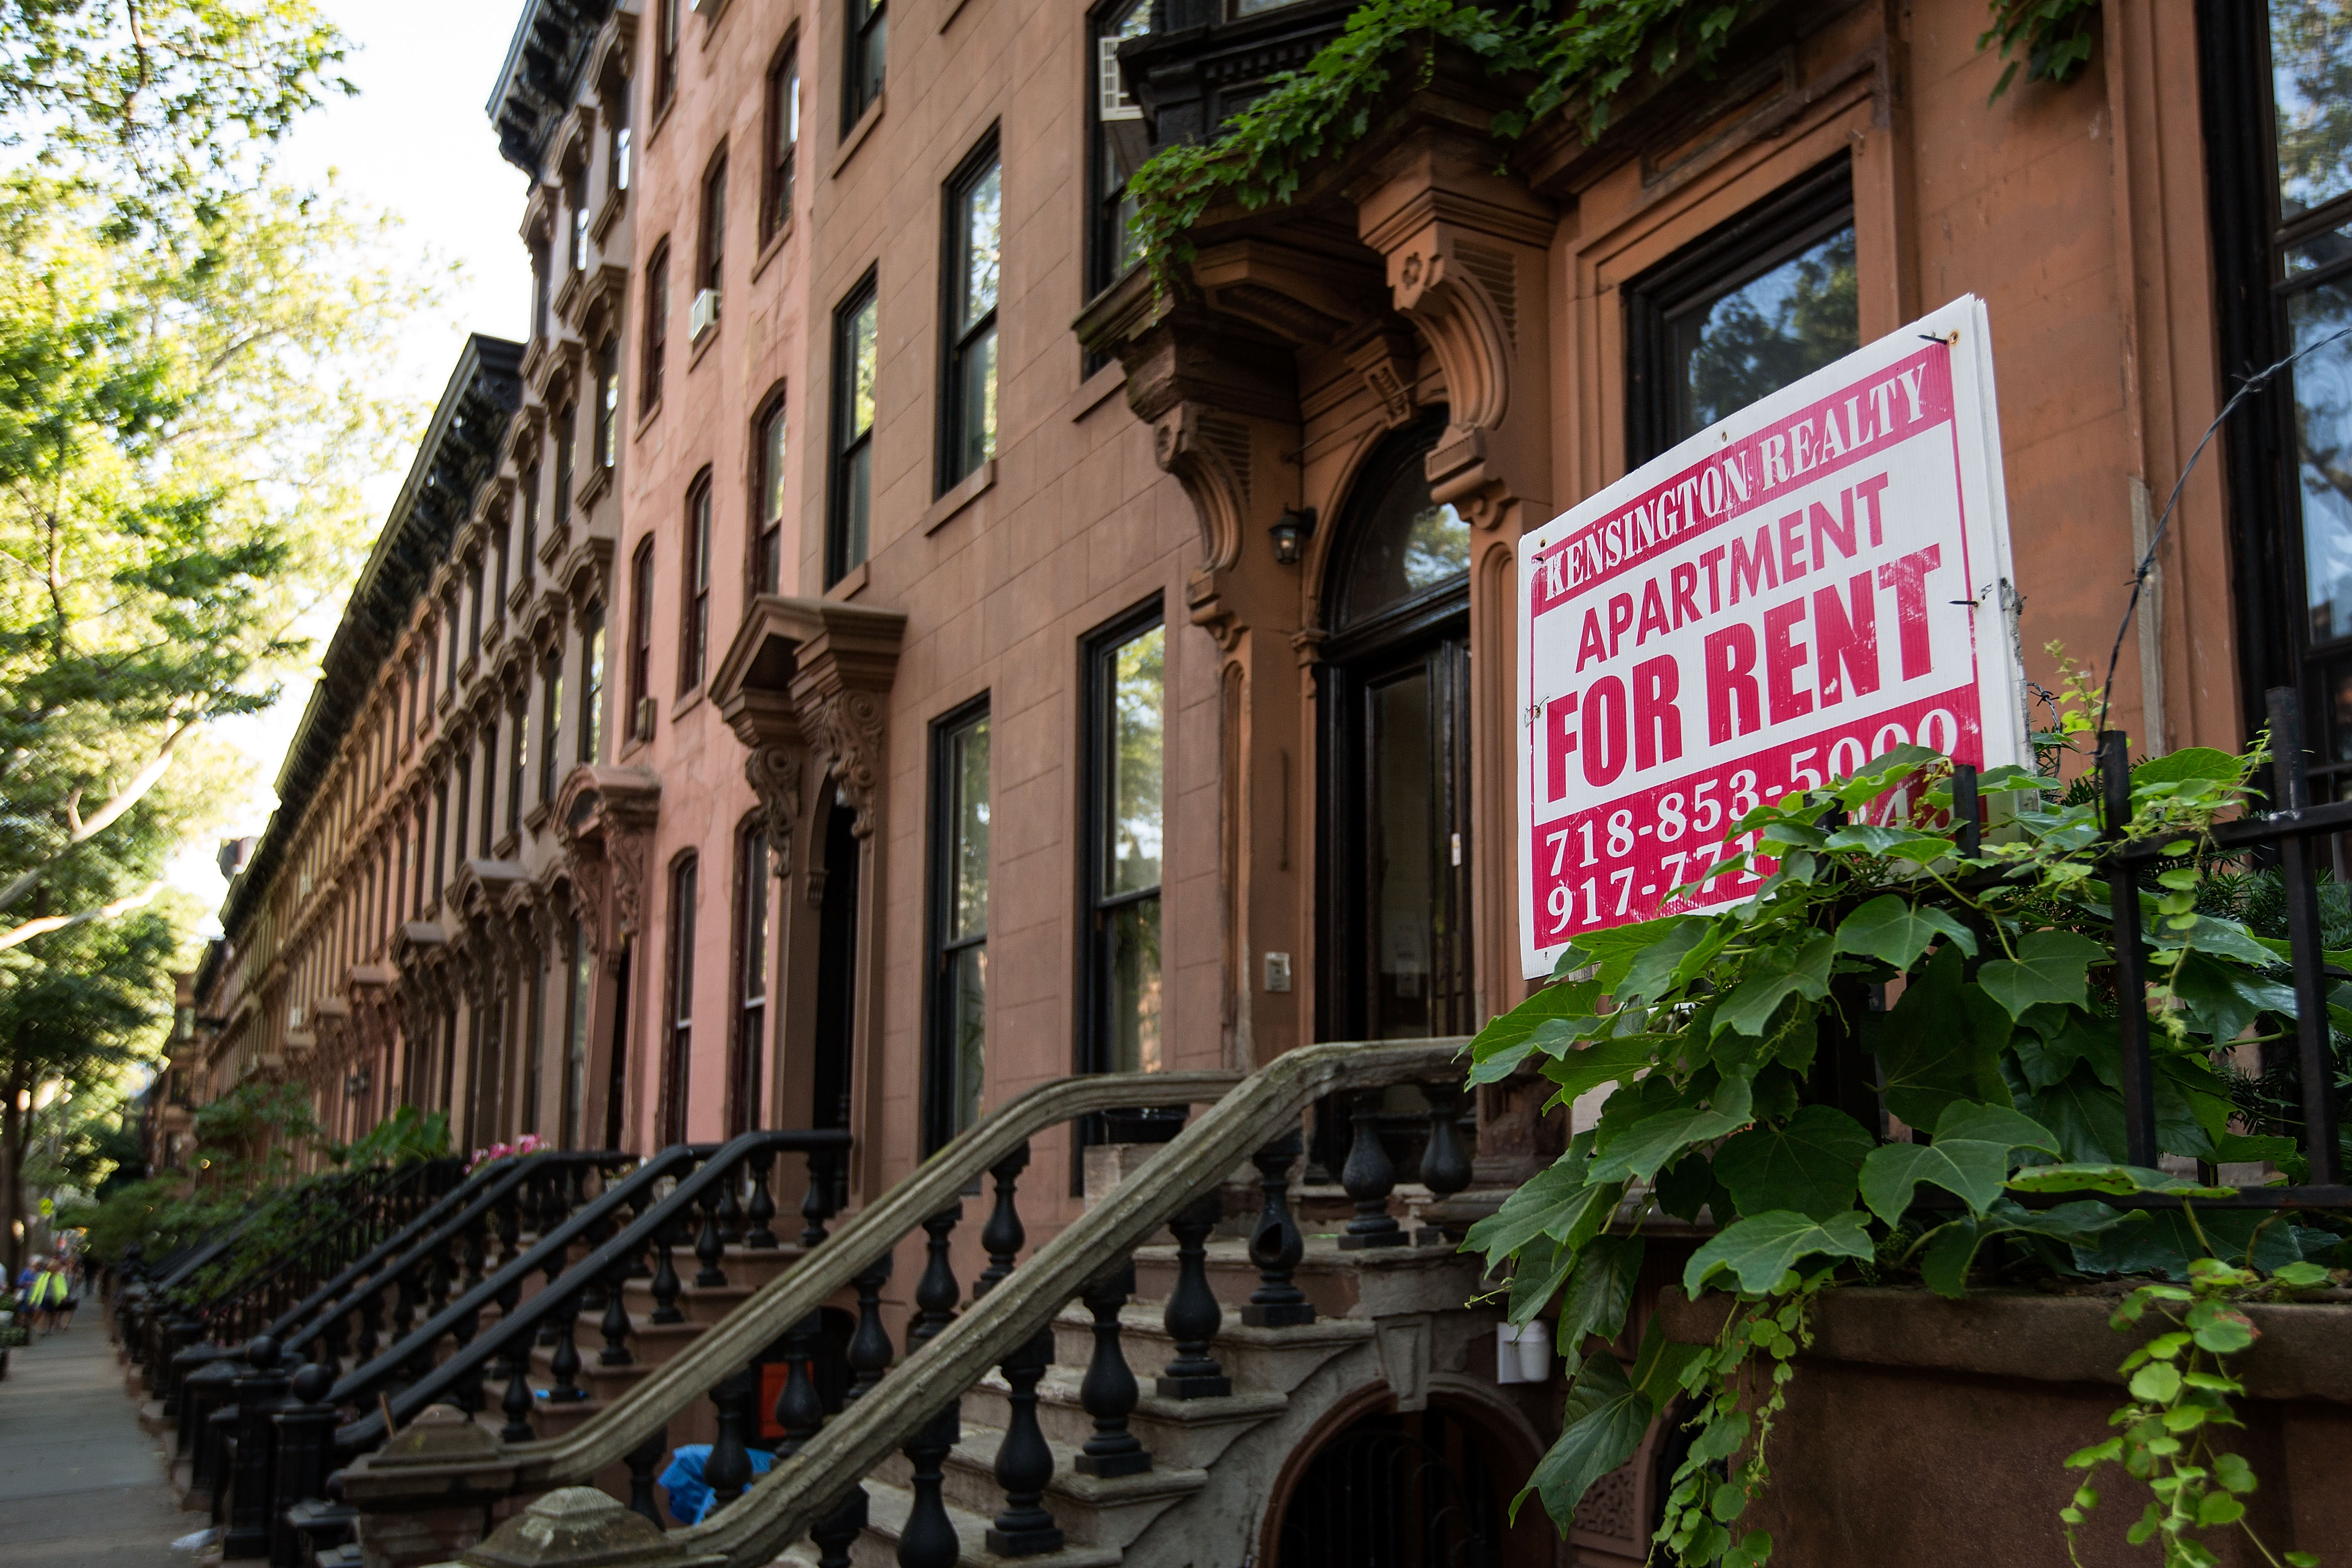 New index aims to measure rent inflation more quickly - Marketplace